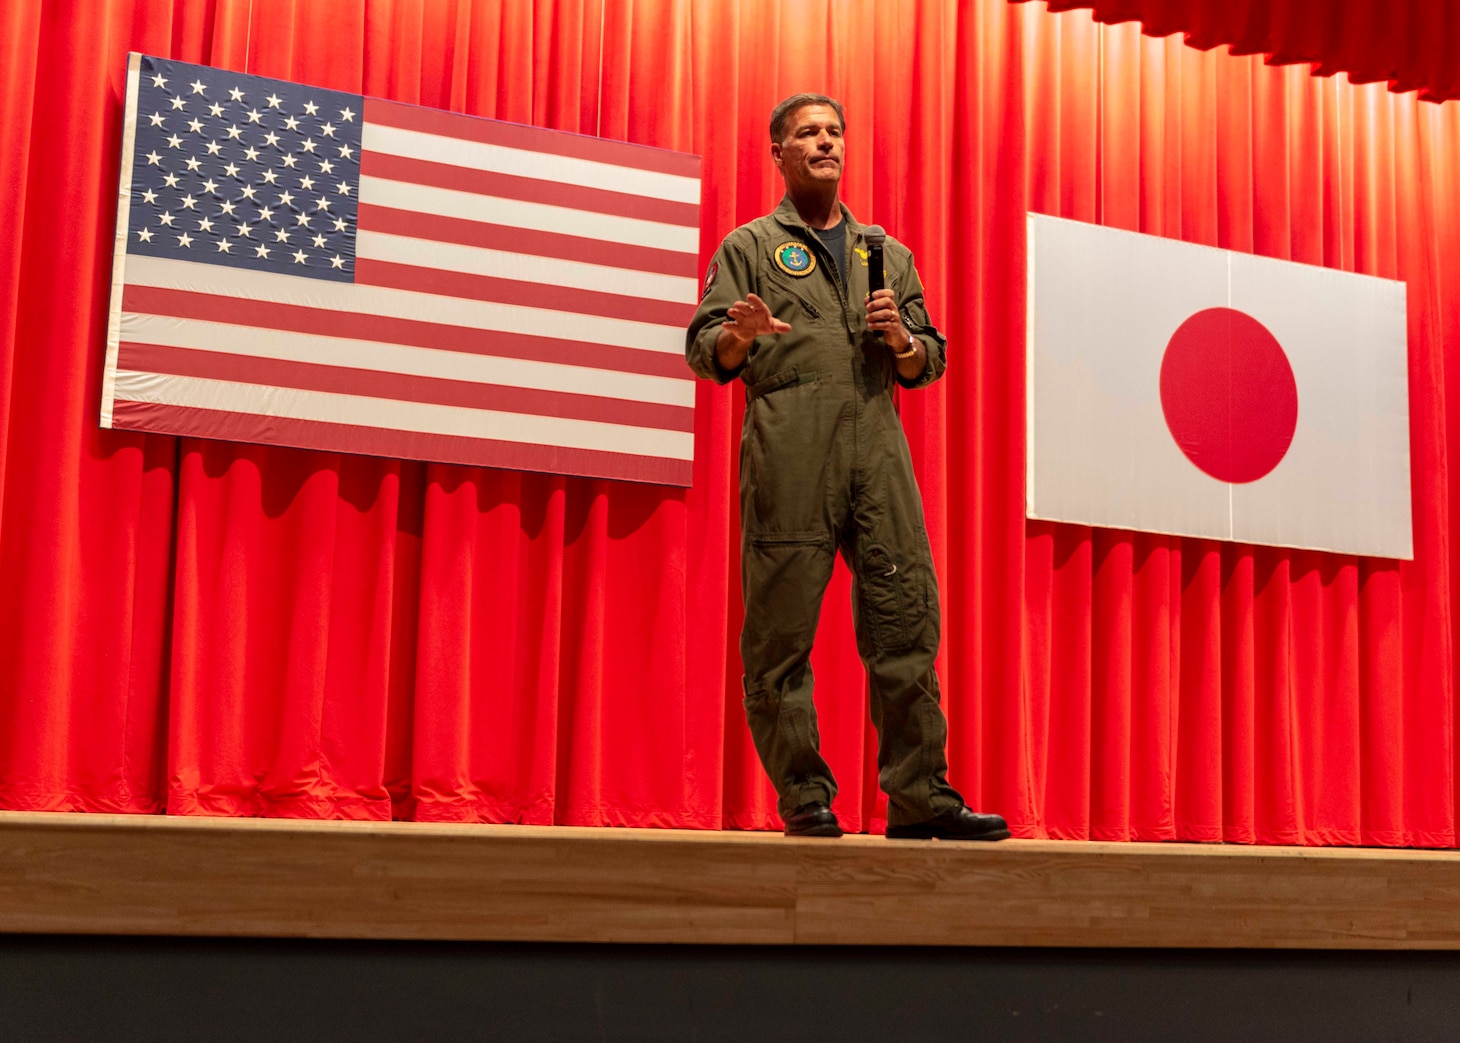 YOKOSUKA, Japan (Jan. 23, 2019)- Adm. John C. Aquilino, commander of U.S. Pacific Fleet speaks during an all-hands call for service members at the Fleet Activities (FLEACT) Yokosuka Fleet Theater Jan. 23. FLEACT Yokosuka provides, maintains, and operates base facilities and services in support of the U.S. 7th Fleet's forward-deployed naval forces, 71 tenant commands, and more than 27,000 military and civilian personnel.